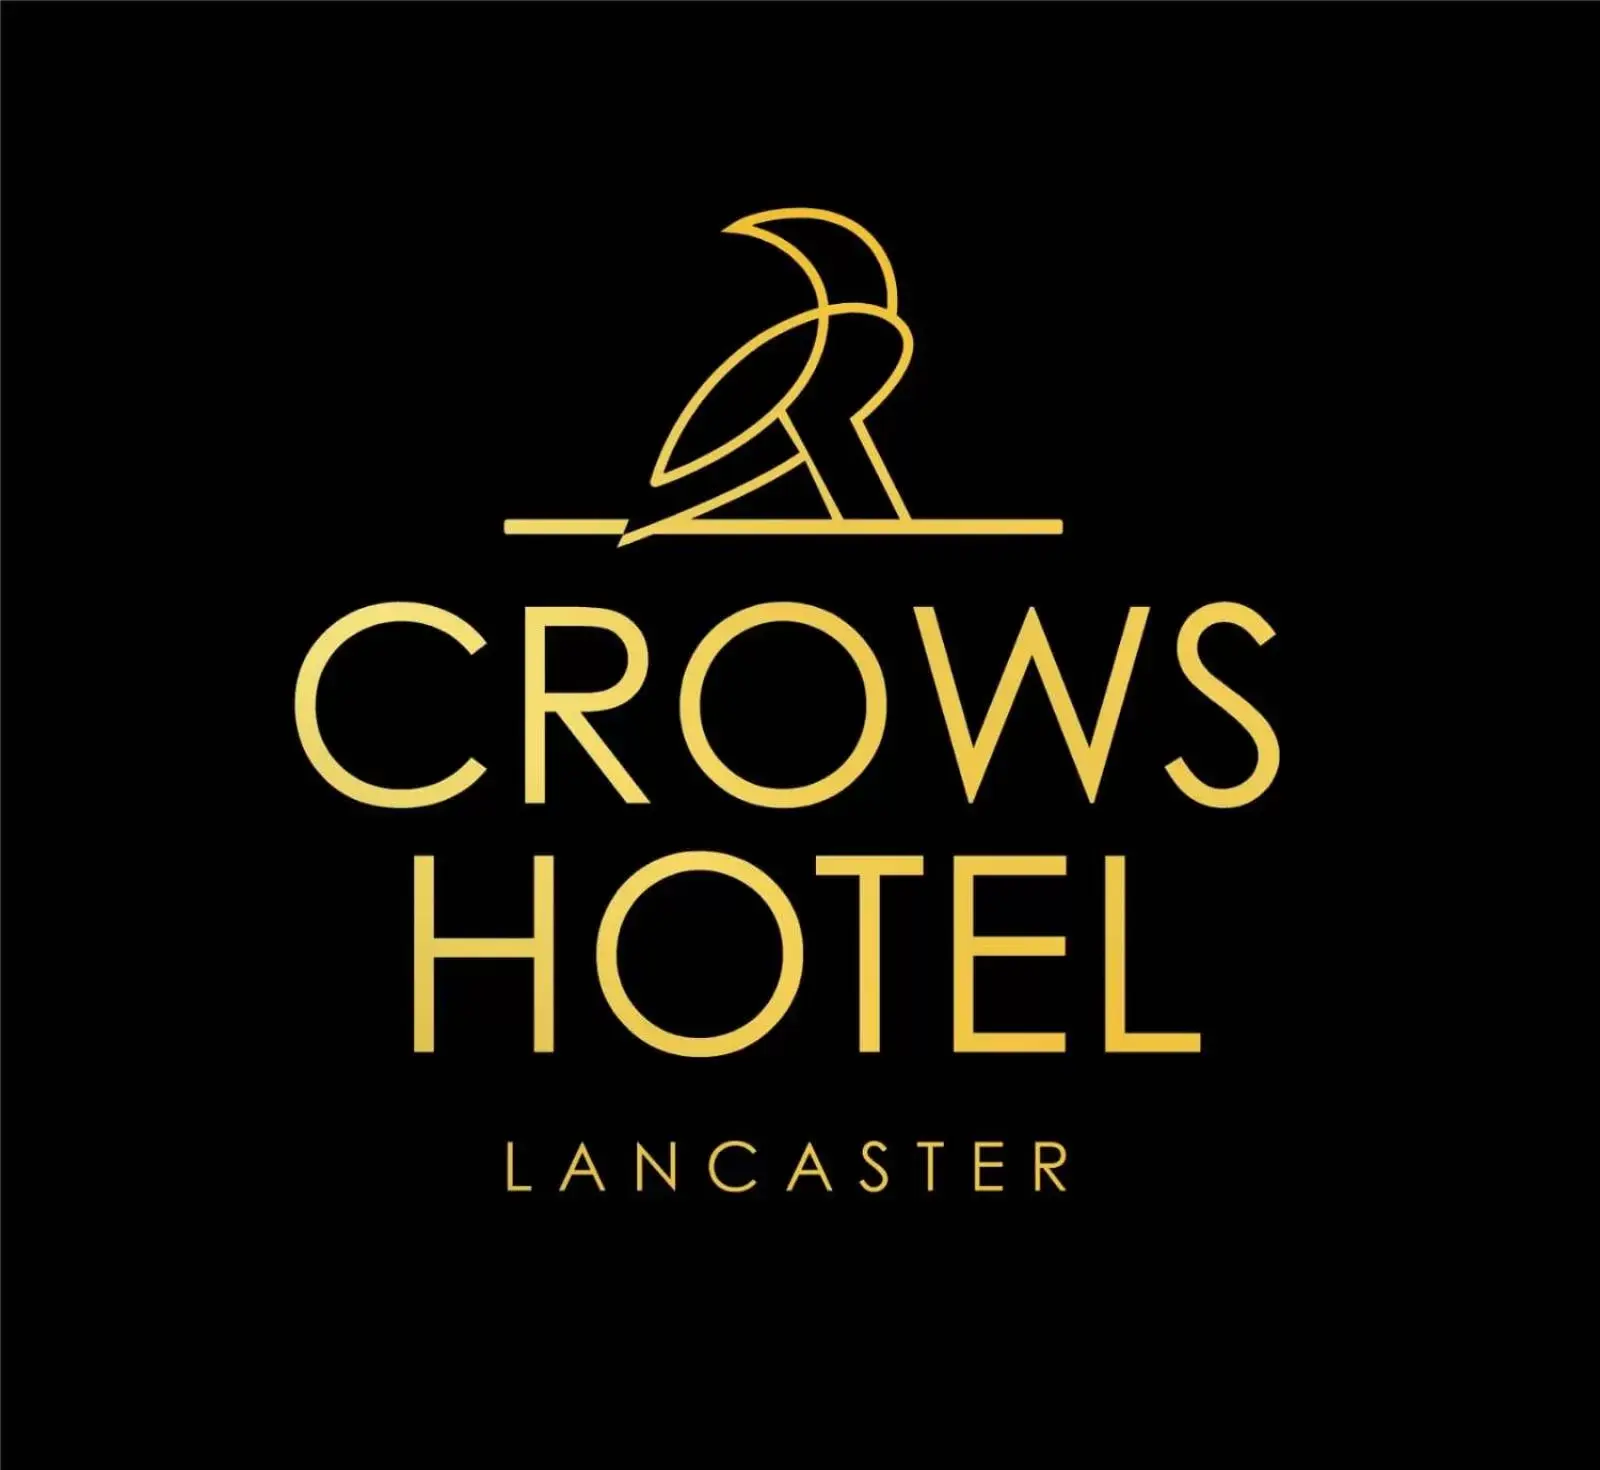 Logo/Certificate/Sign in Crows Hotel